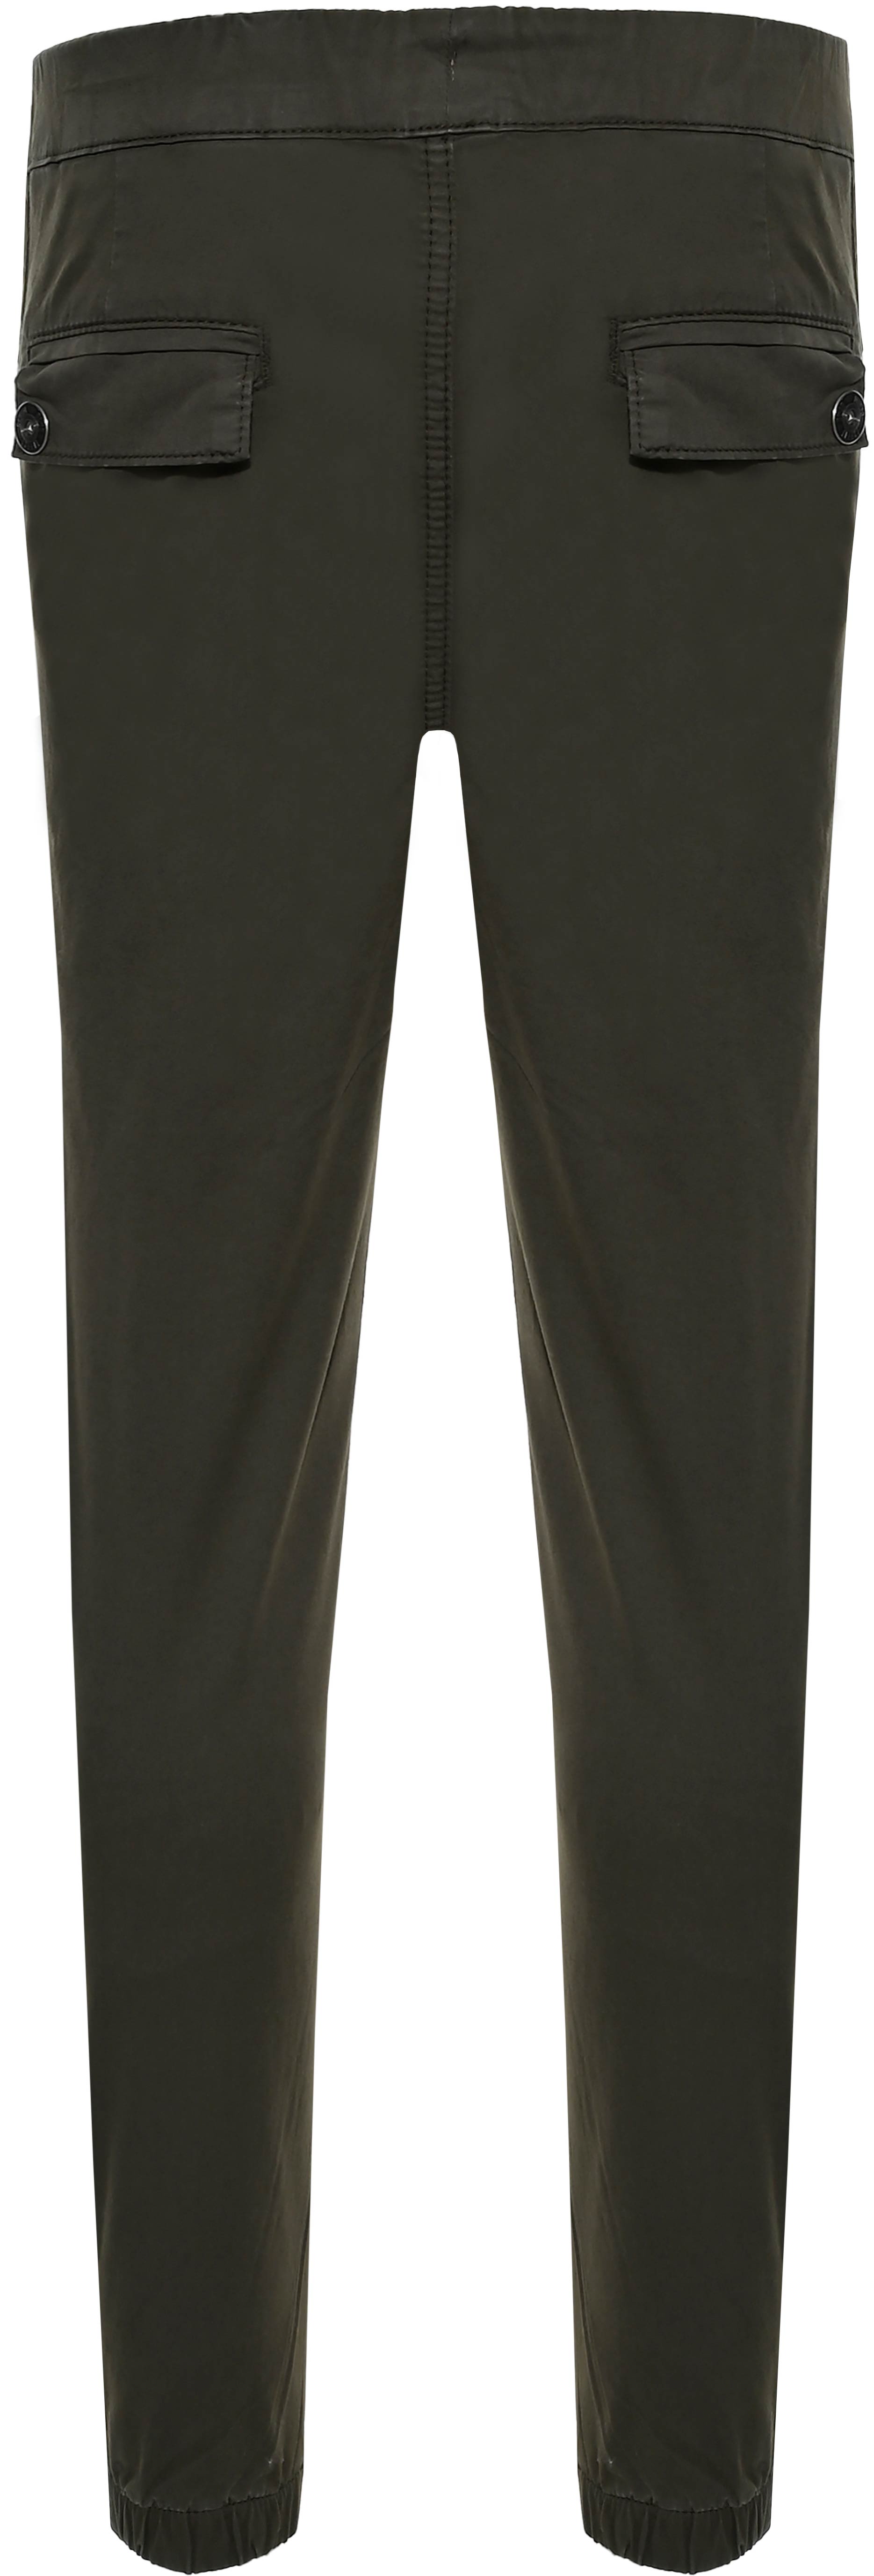 2824-Boys Chino Joggpant available in Slim,Normal